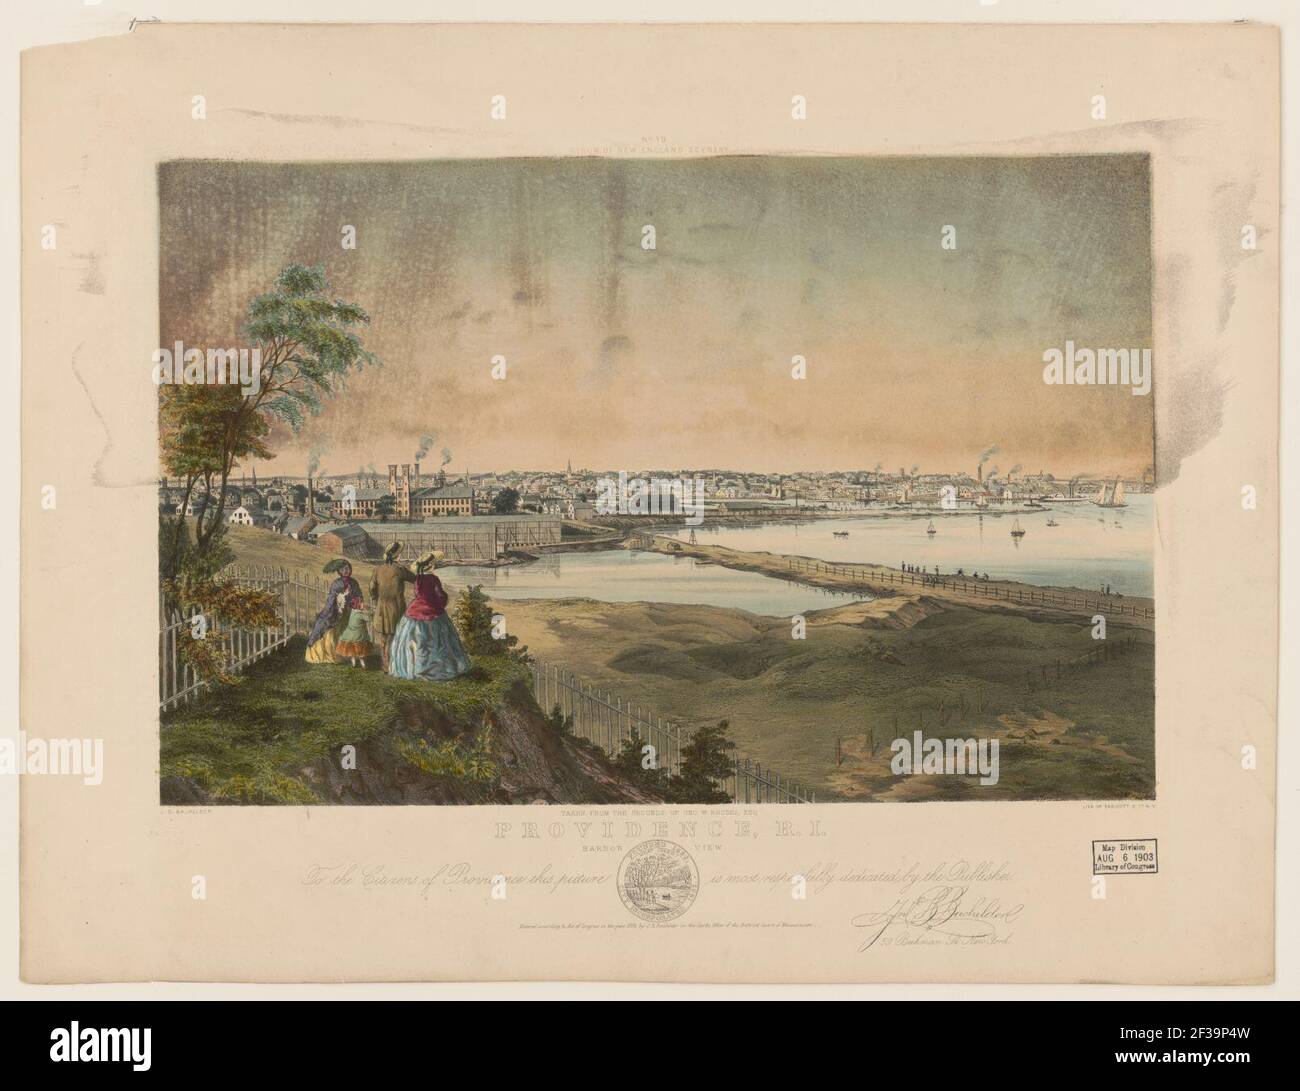 Providence, R.I., harbor view, taken from the grounds of Geo. W. Rhodes, Esq. - J.B. Bachelder ; lith. of Endicott & Co., N.Y. Stock Photo